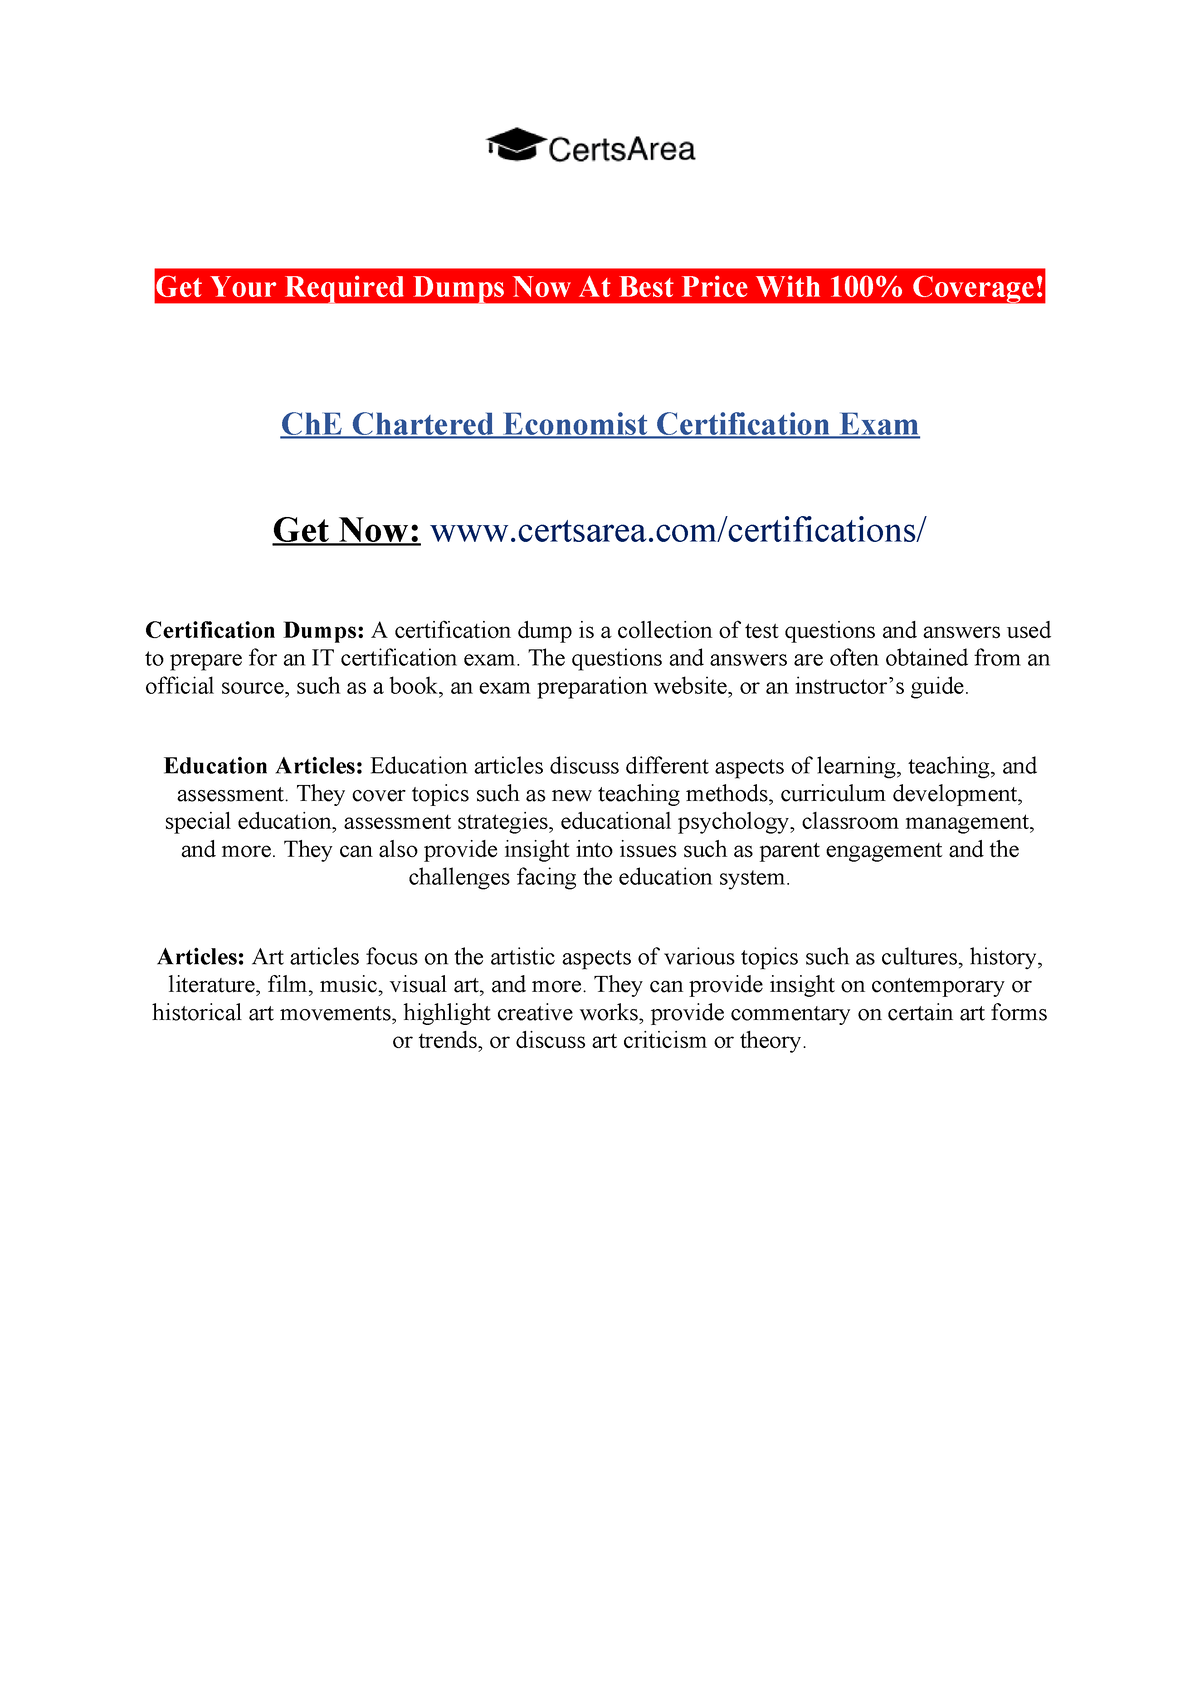 Ch E Chartered Economist Certification Exam Get Your Required Dumps